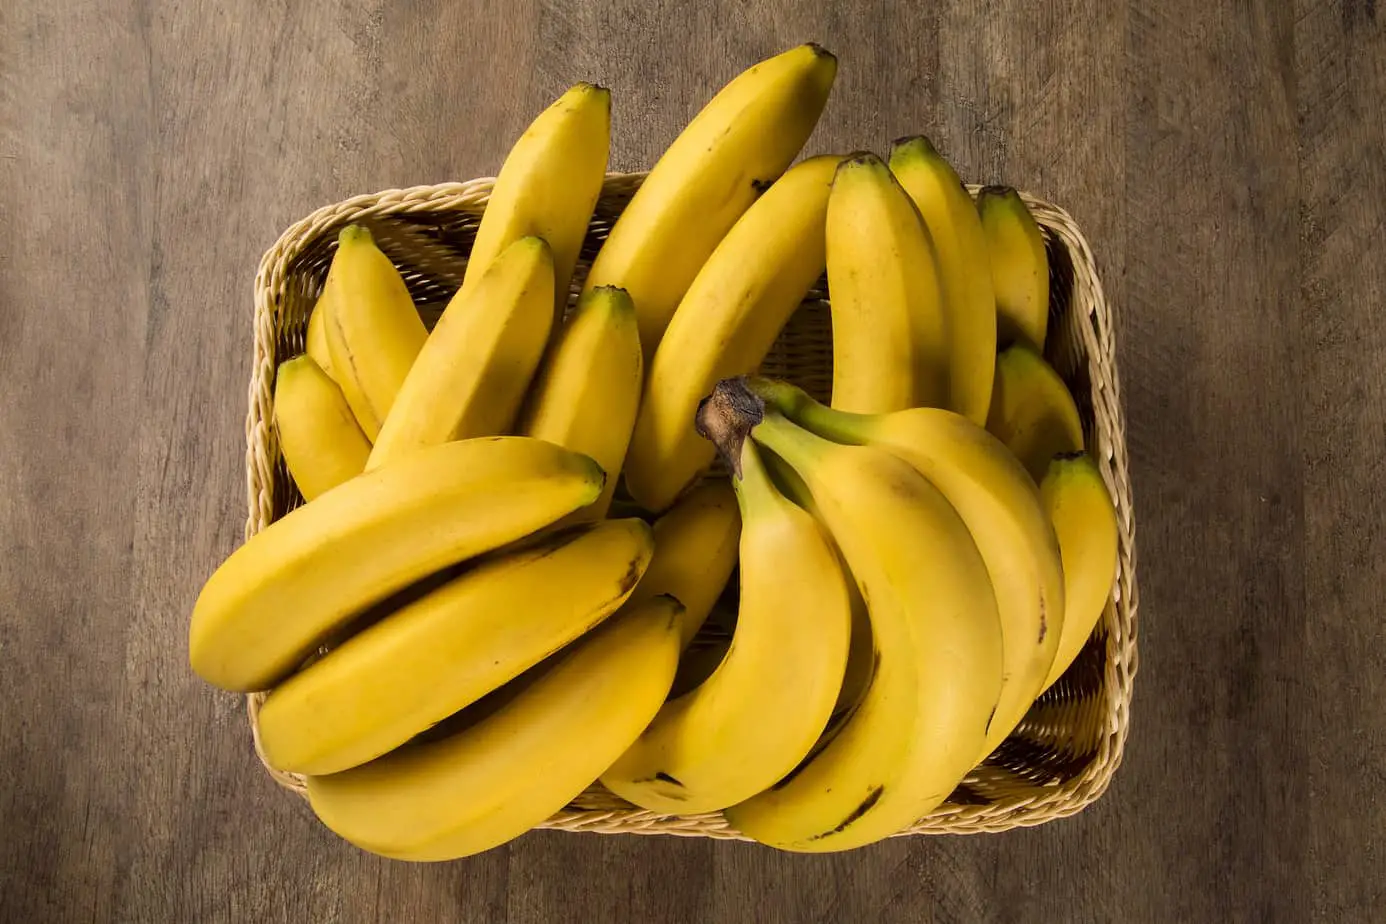 How to store bananas